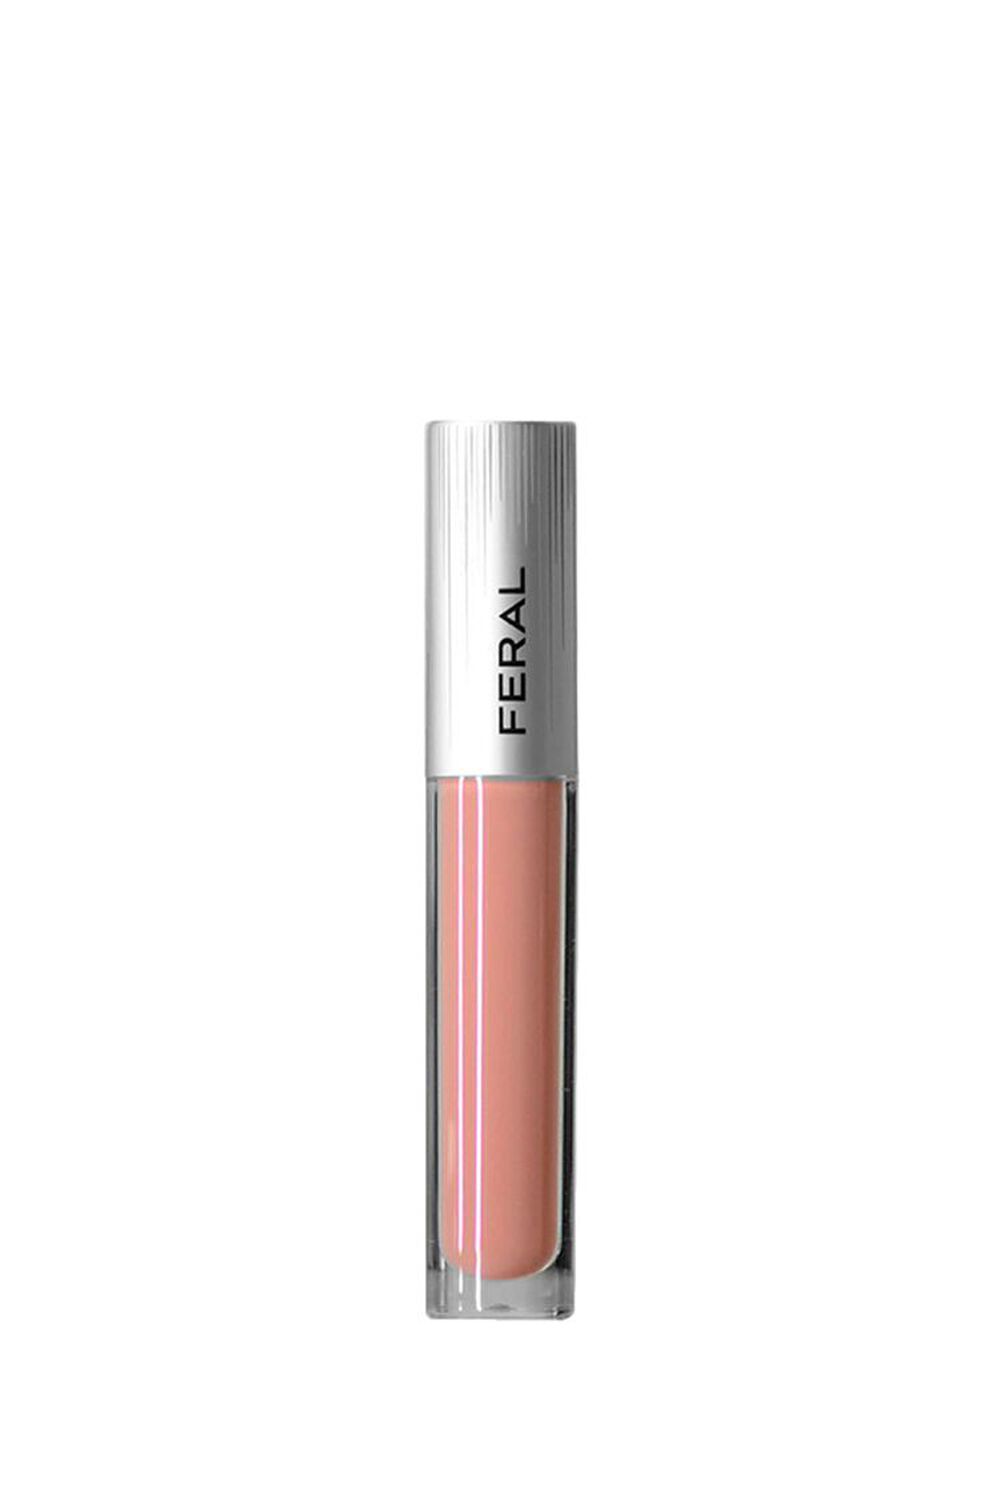 ROSE ALL DAY Feral x Arpi Rose All Day Liquid Matte Lipstick, image 2